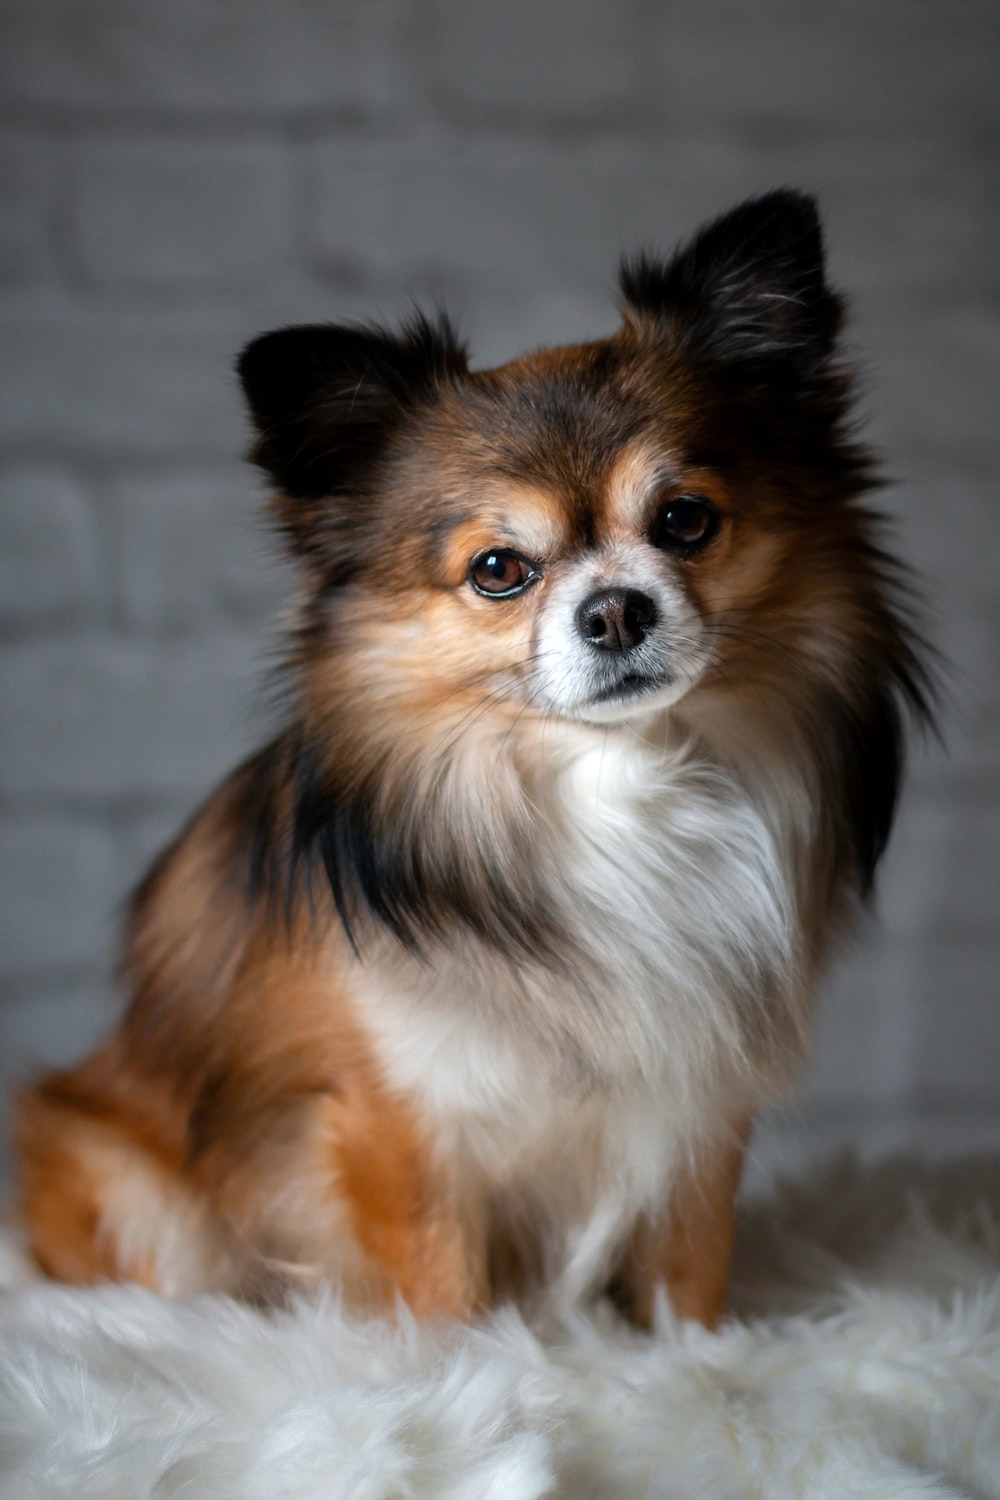 Chihuahua Dog Picture. Download Free Image